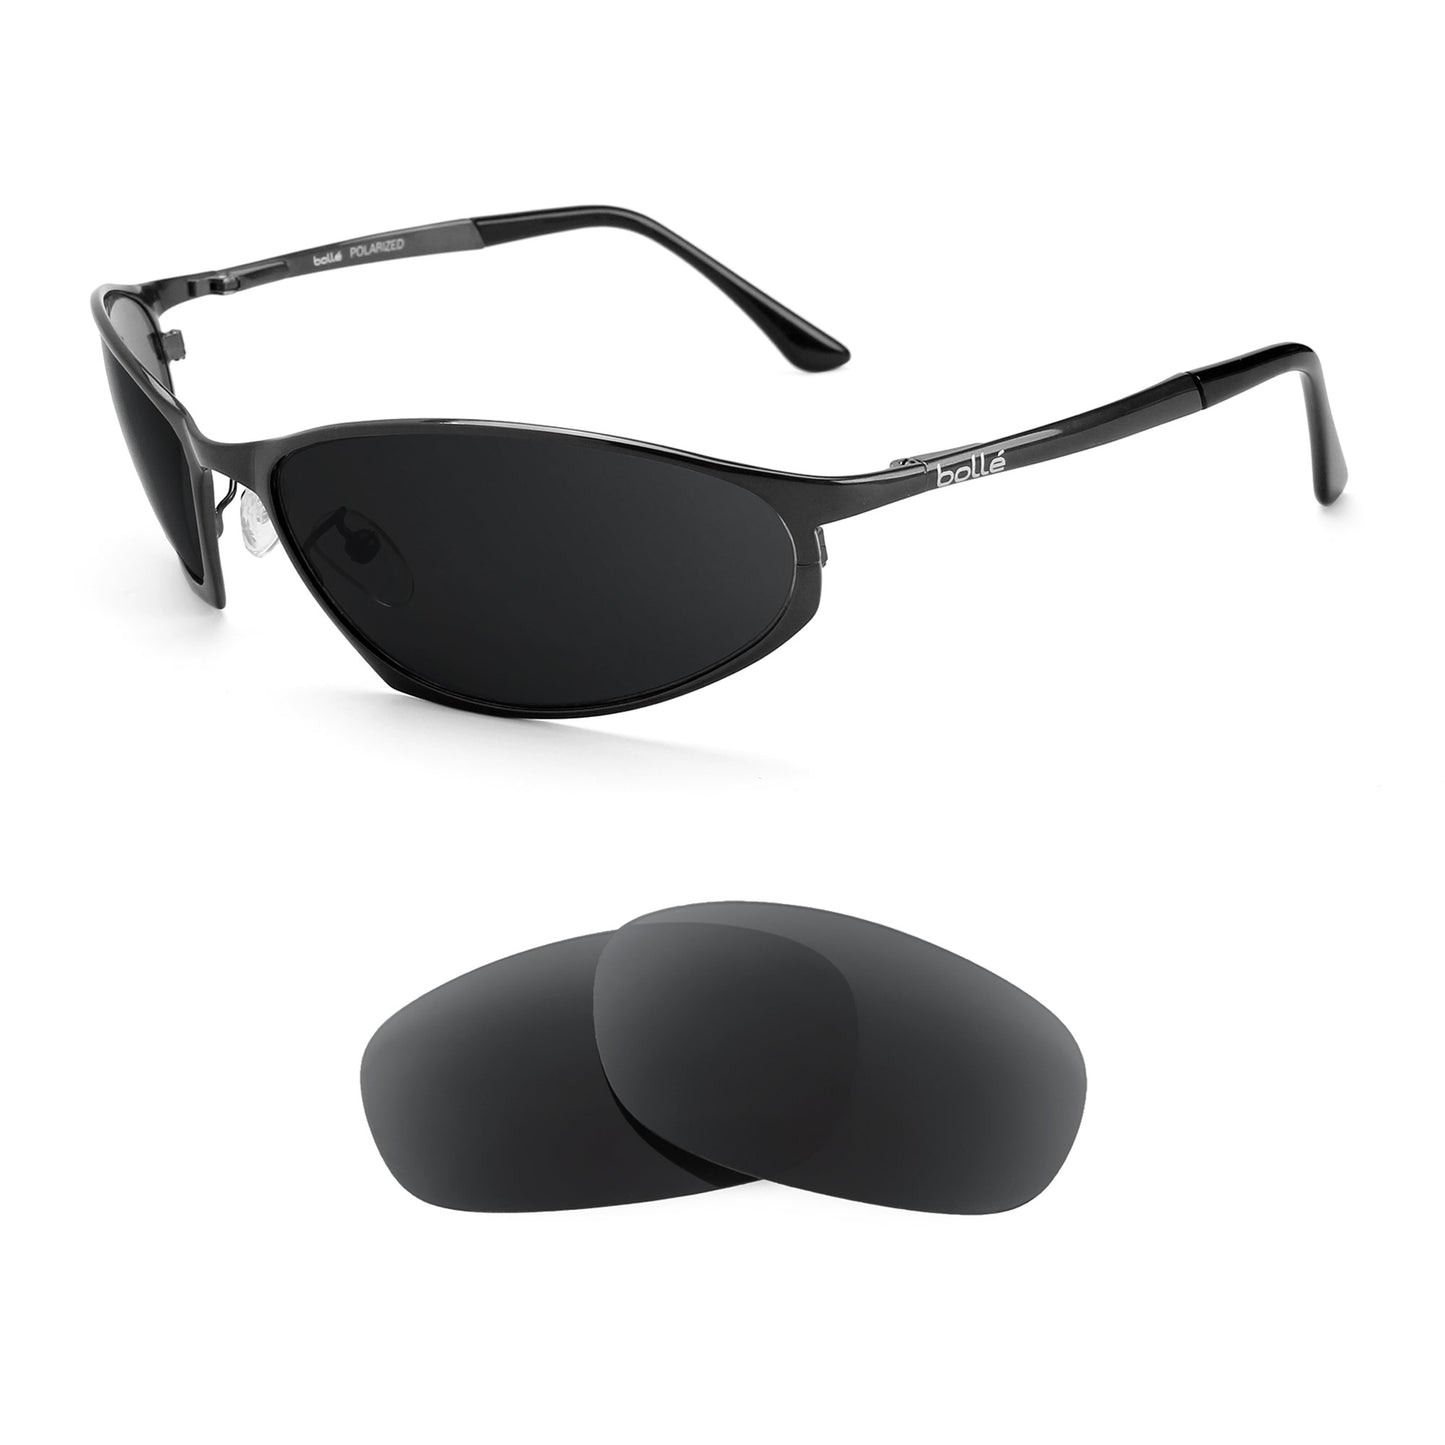 Bolle Limit sunglasses with replacement lenses